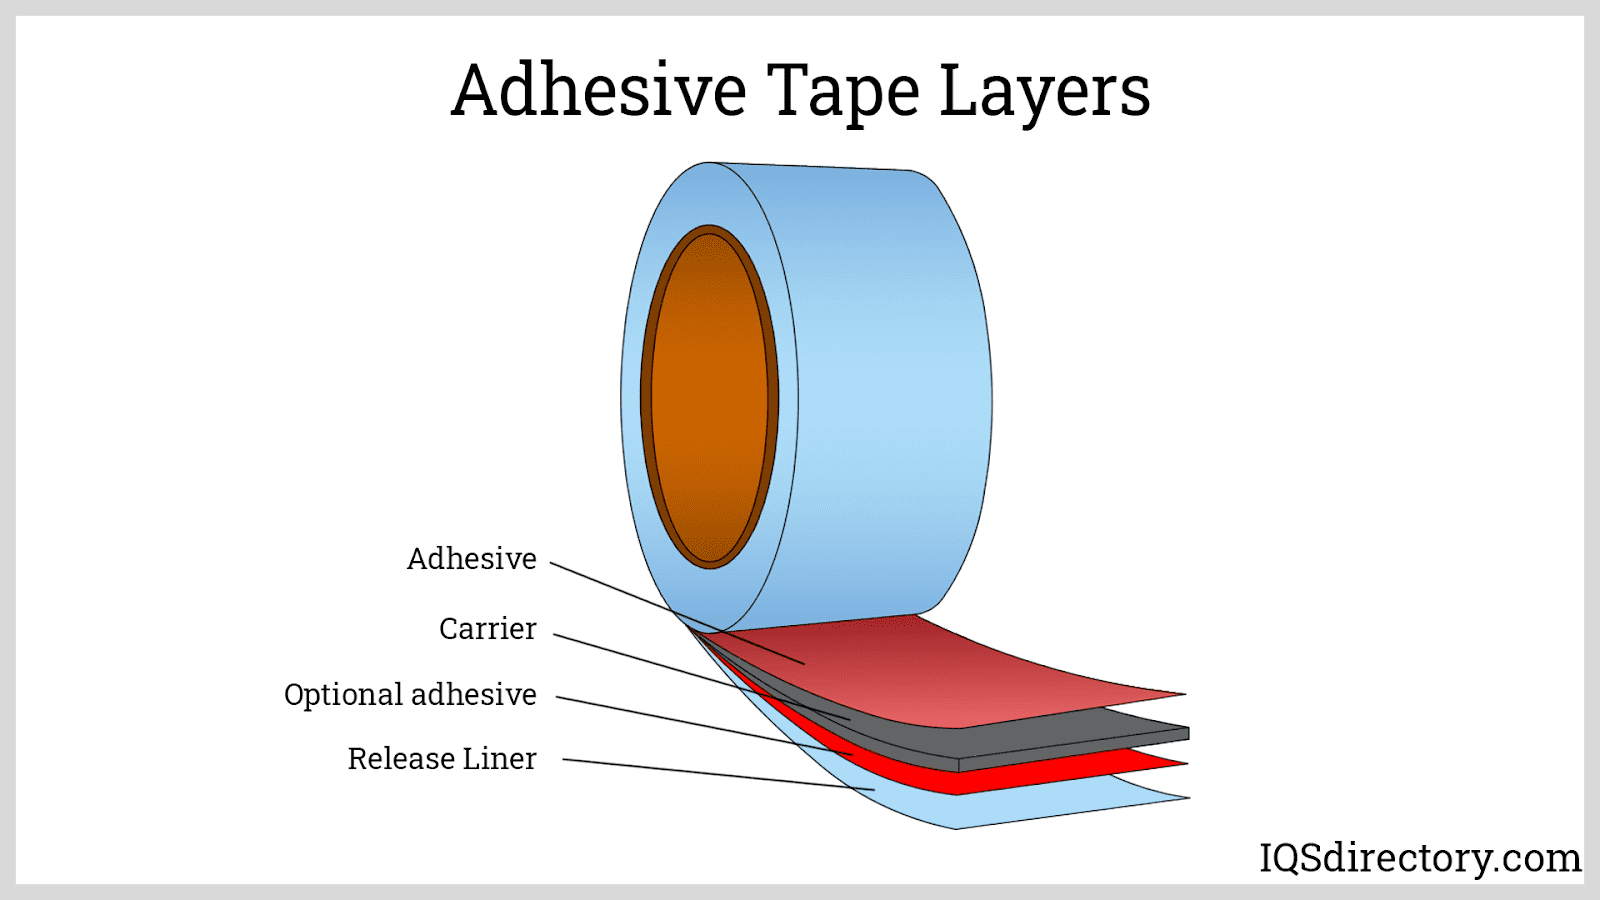 Solvent base 2 sided tape - Adhesive tape Manufacturer, Supplier